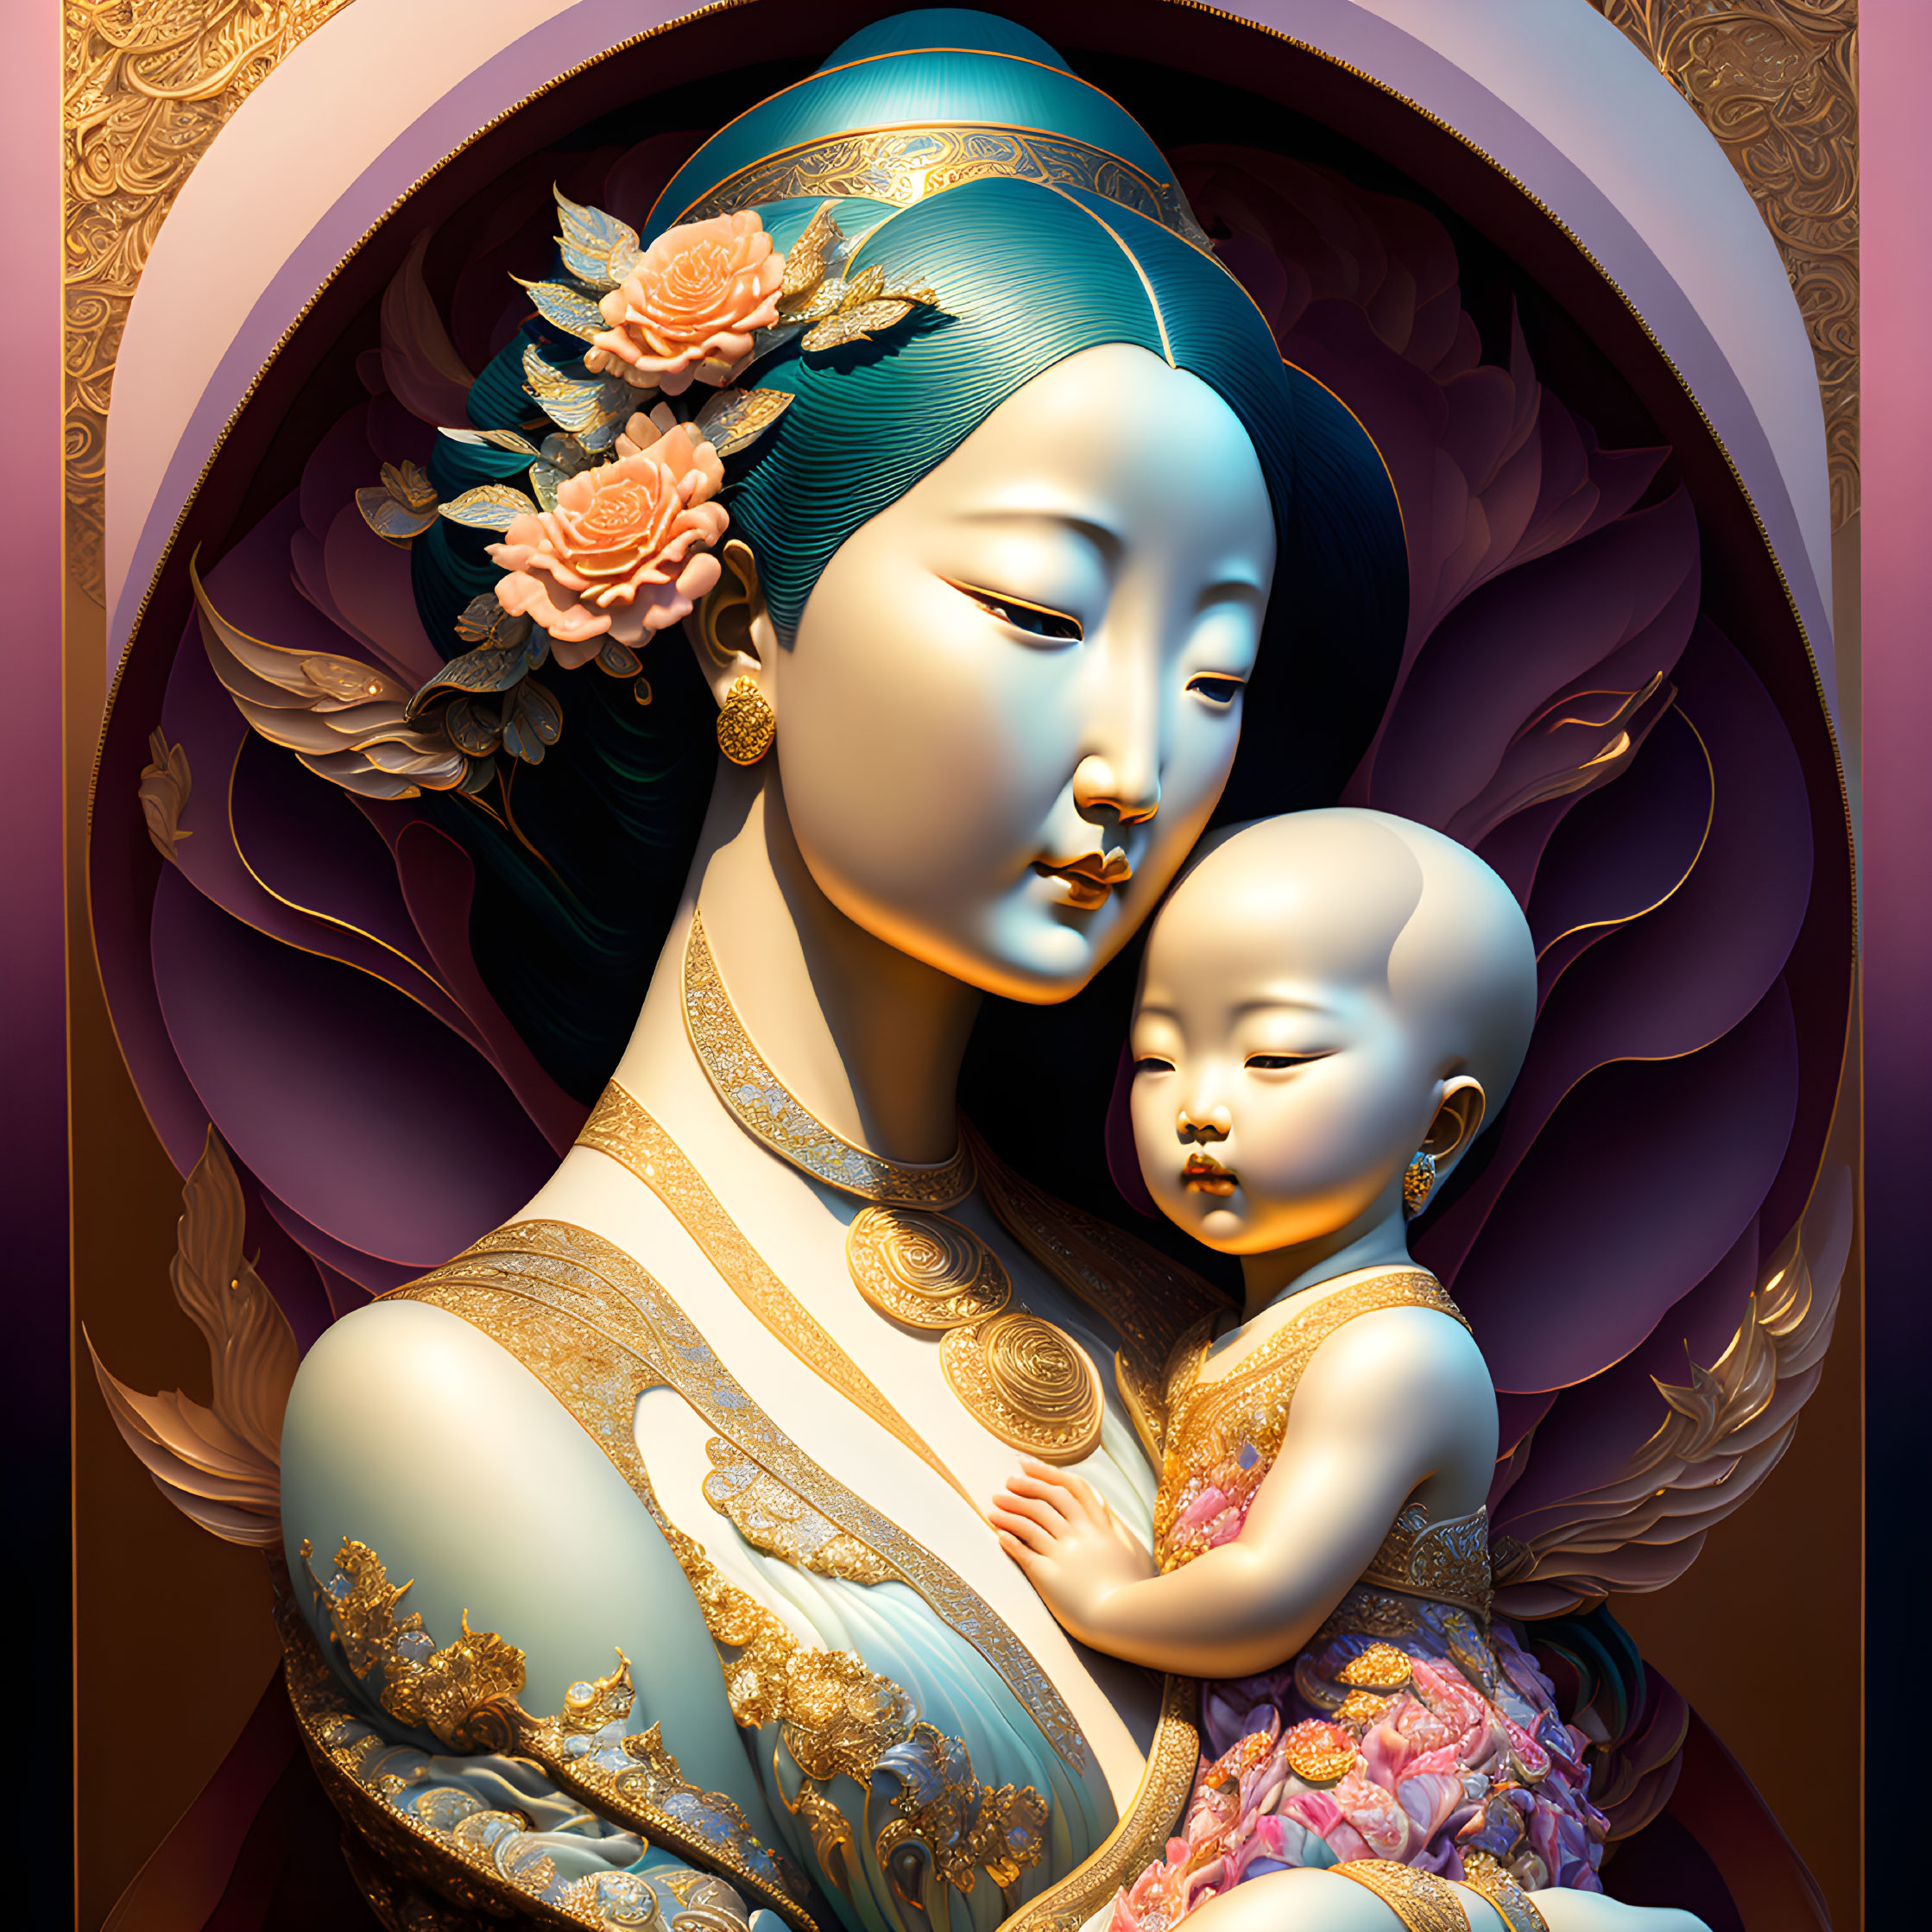 Digital artwork of woman and child in ornate traditional attire with blue skin